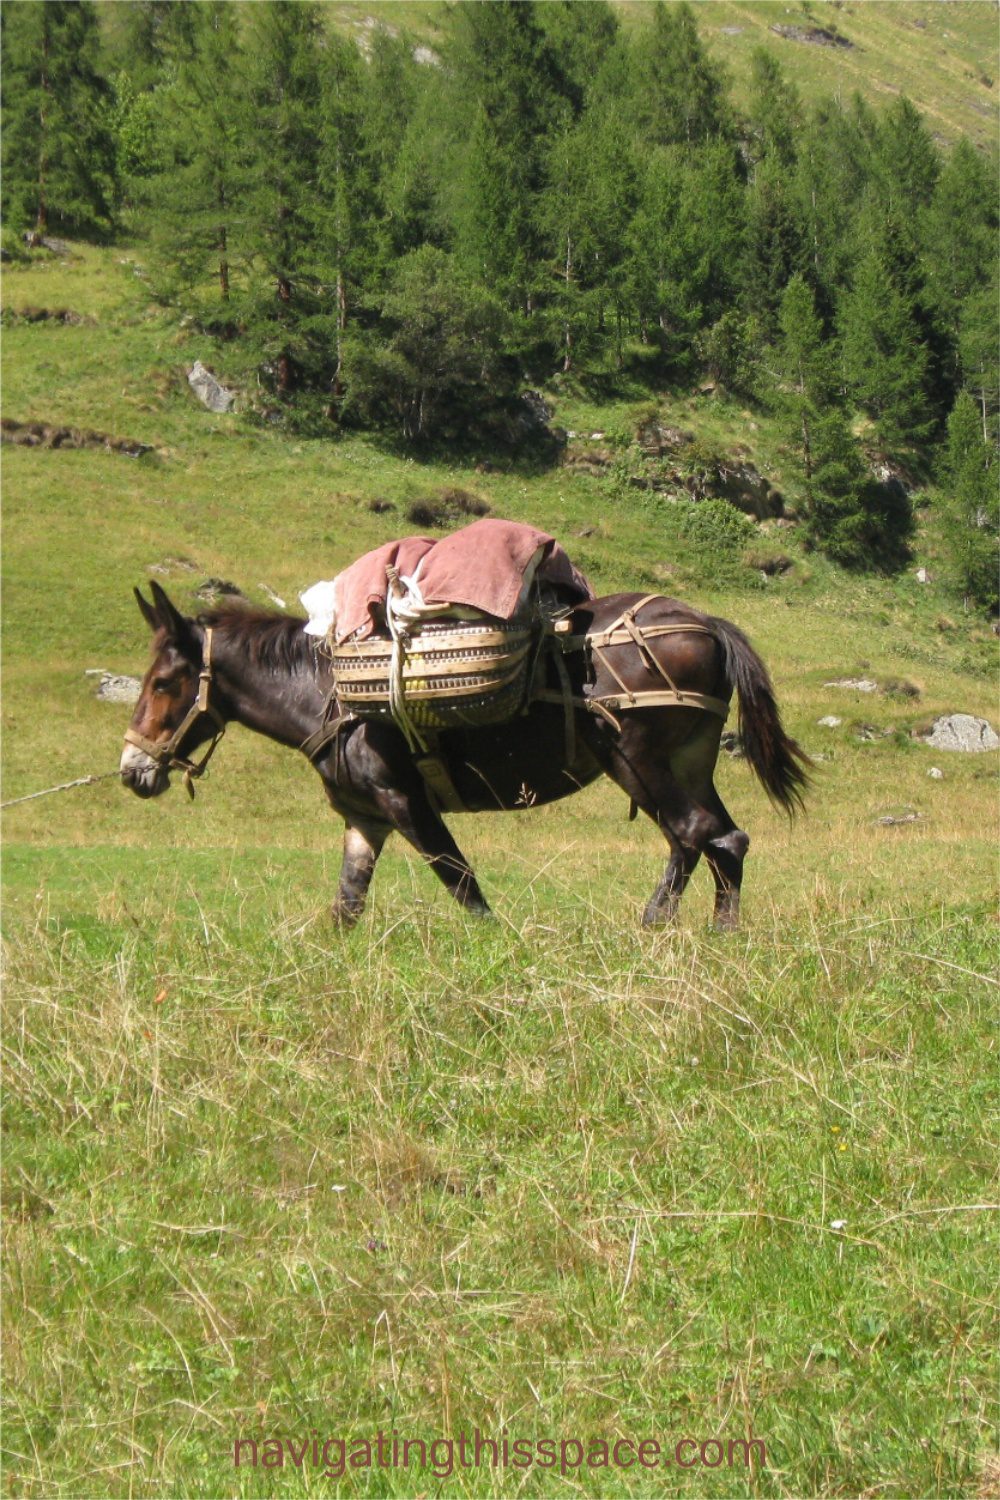 A donkey with a heavy load on its back